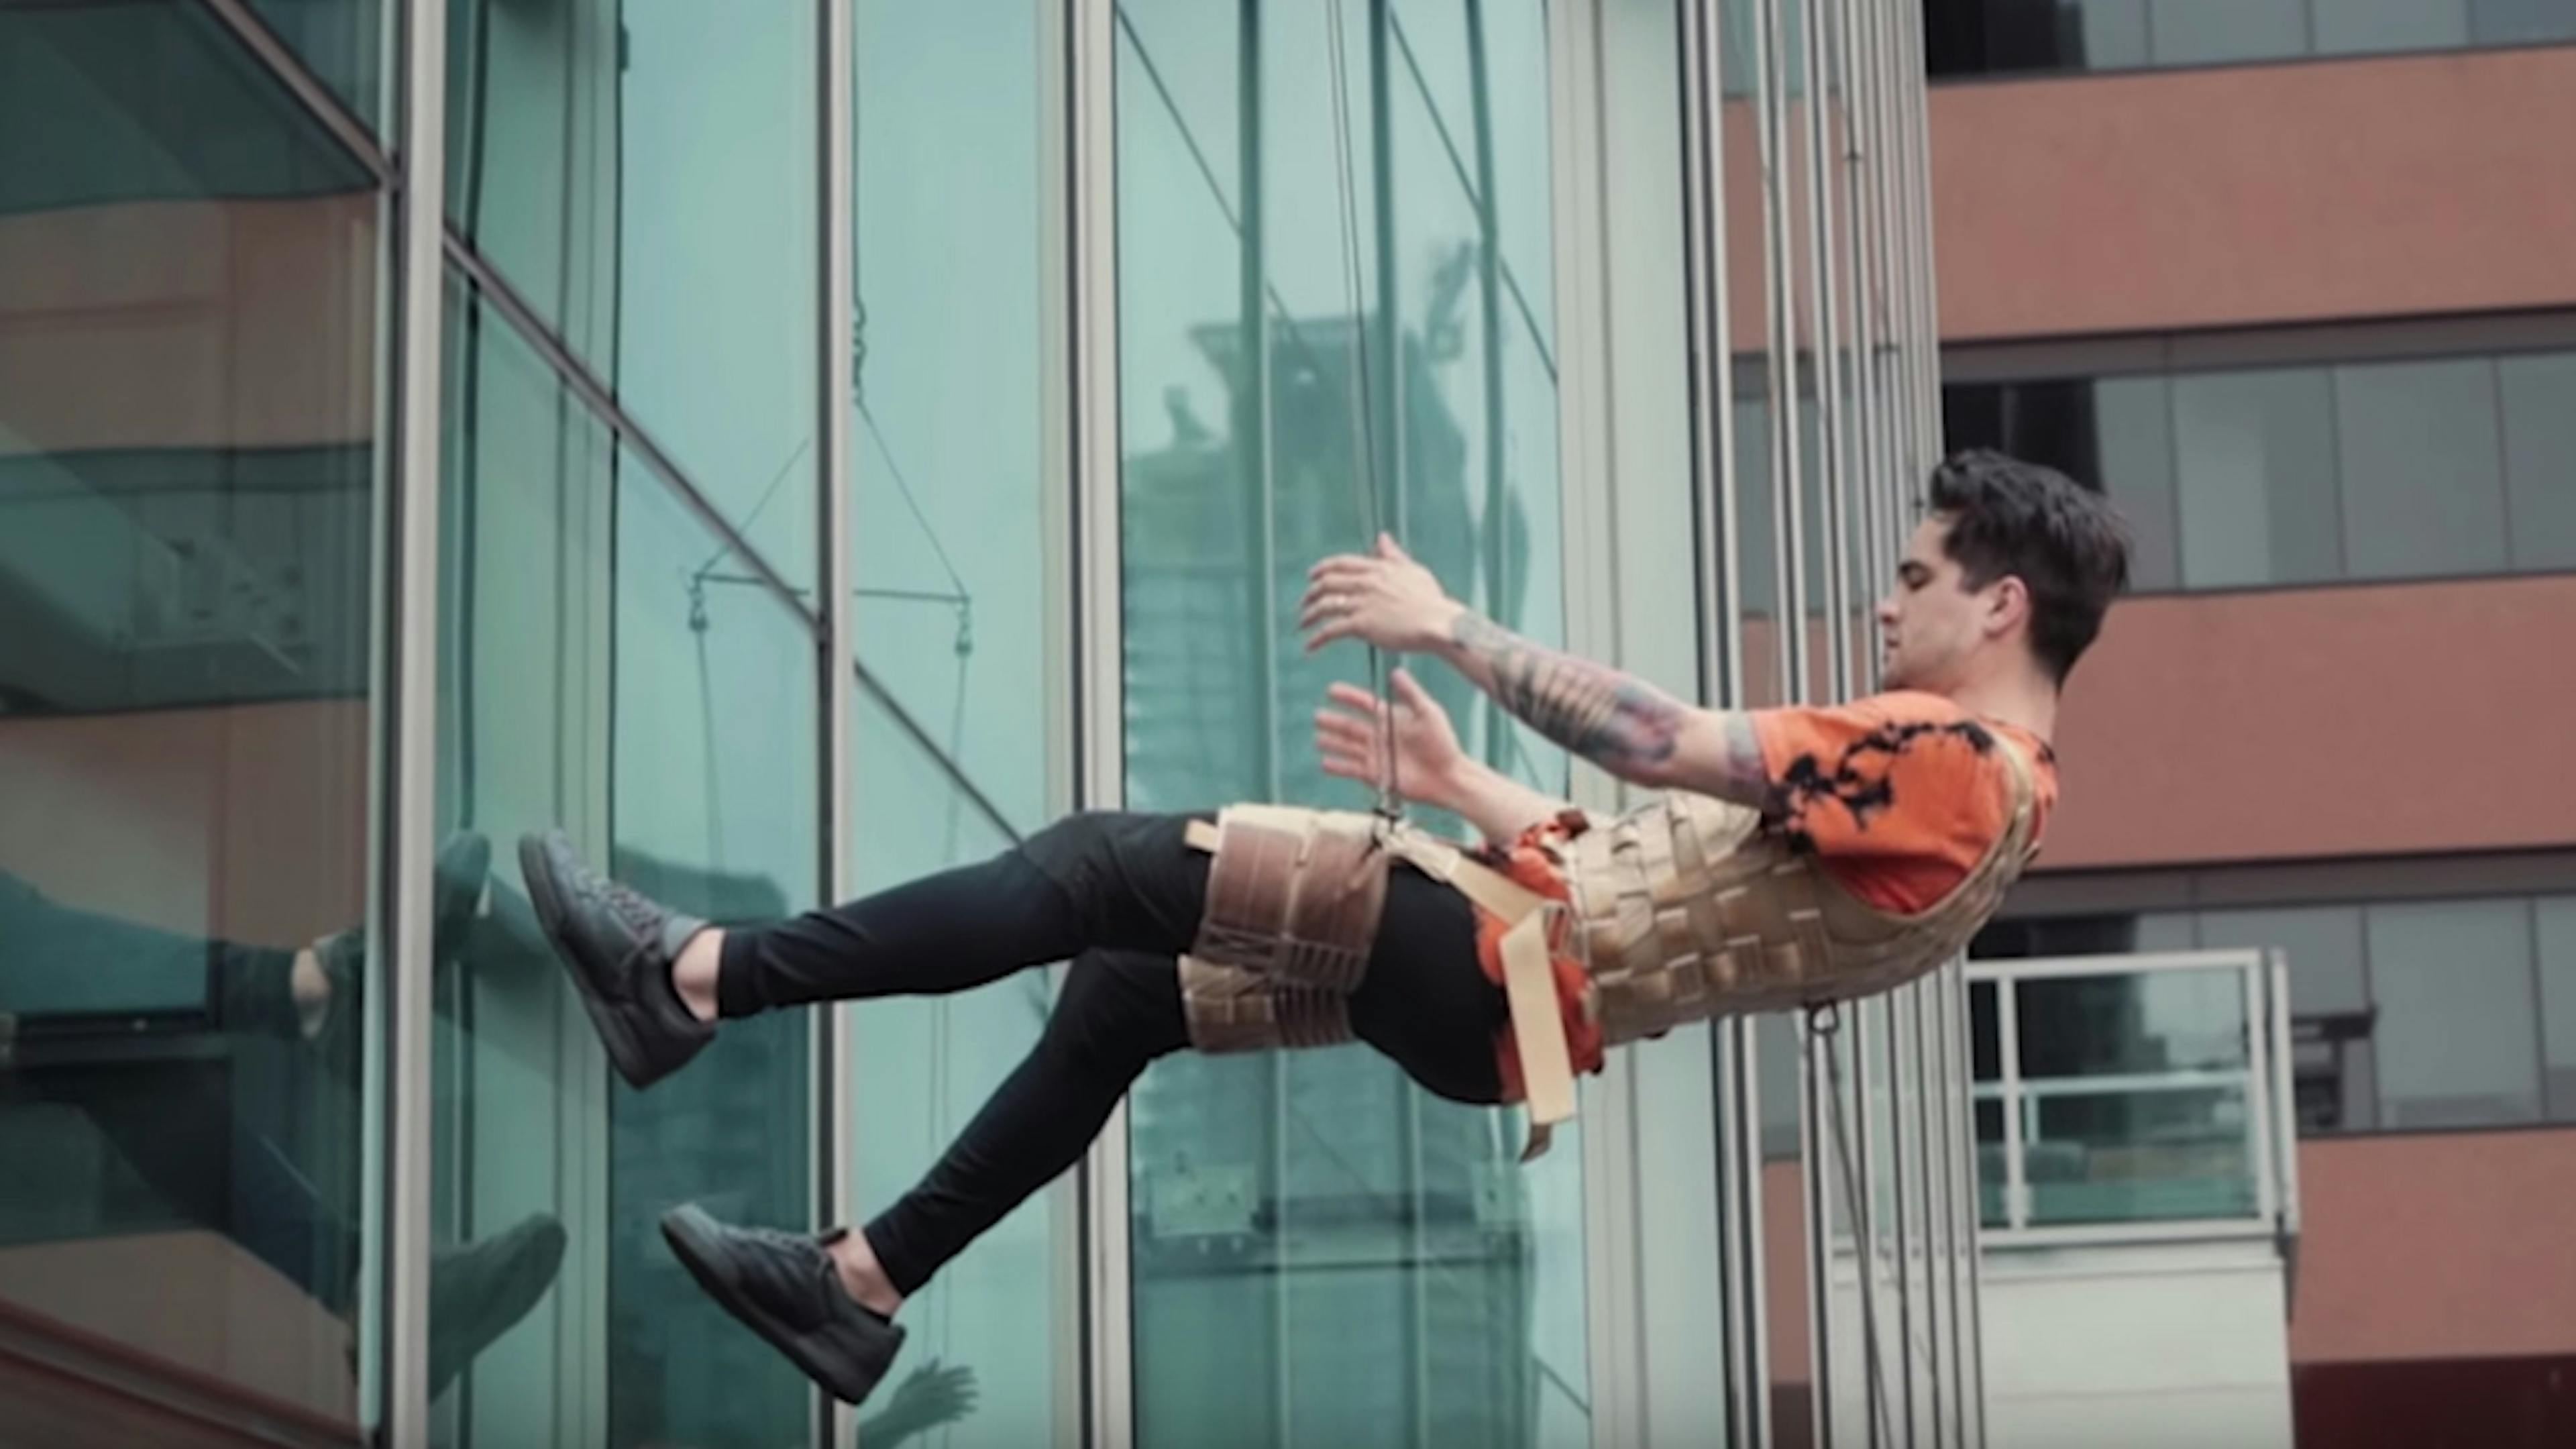 Go Behind The Scenes On Panic!'s Gravity-Defying High Hopes Video